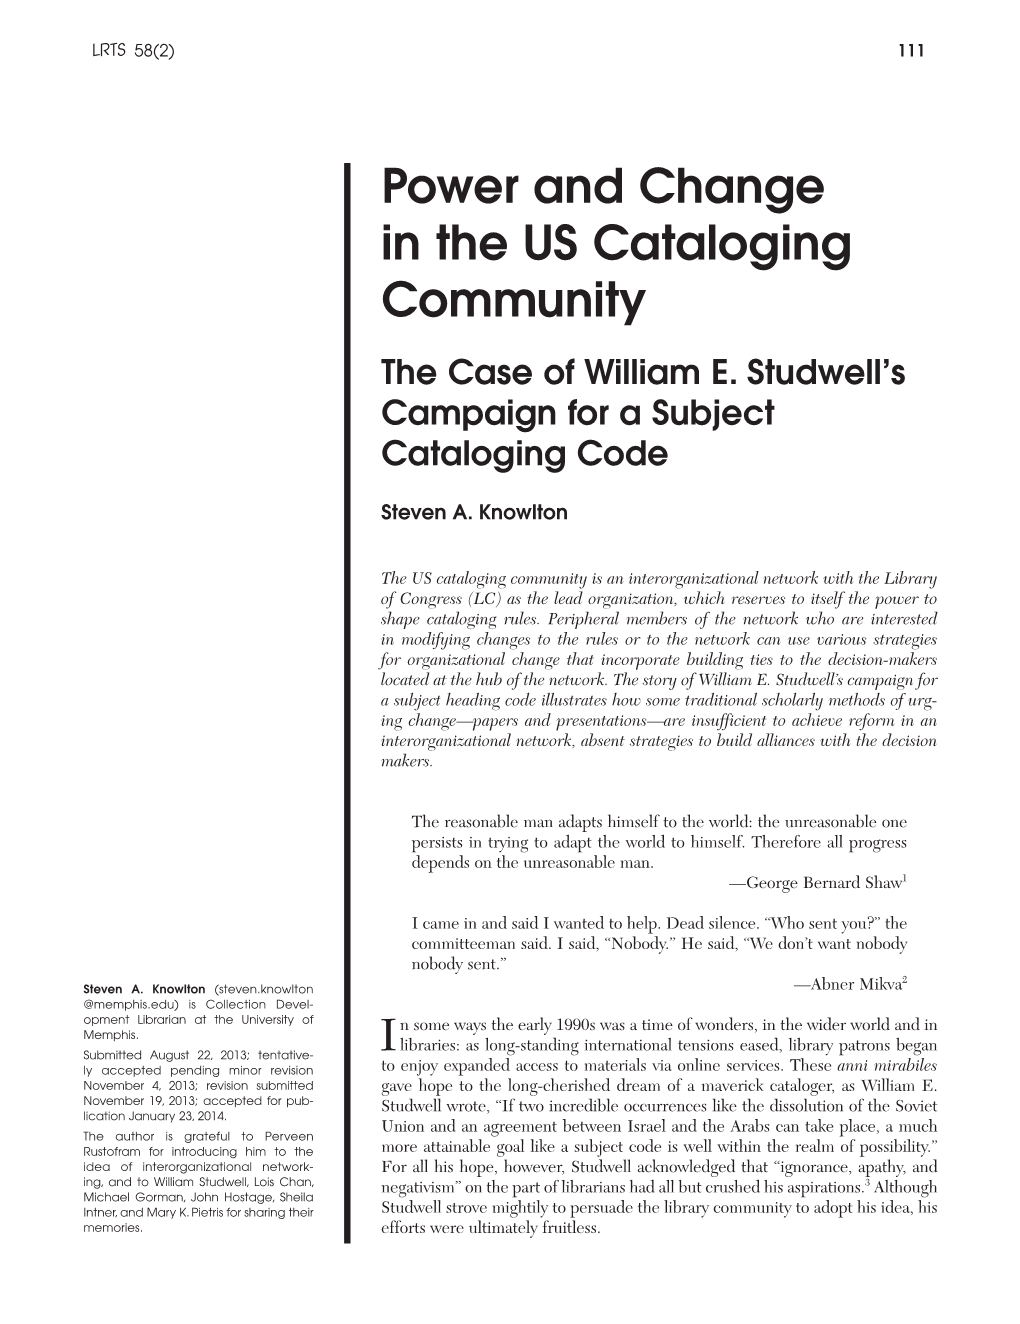 Power and Change in the US Cataloging Community the Case of William E